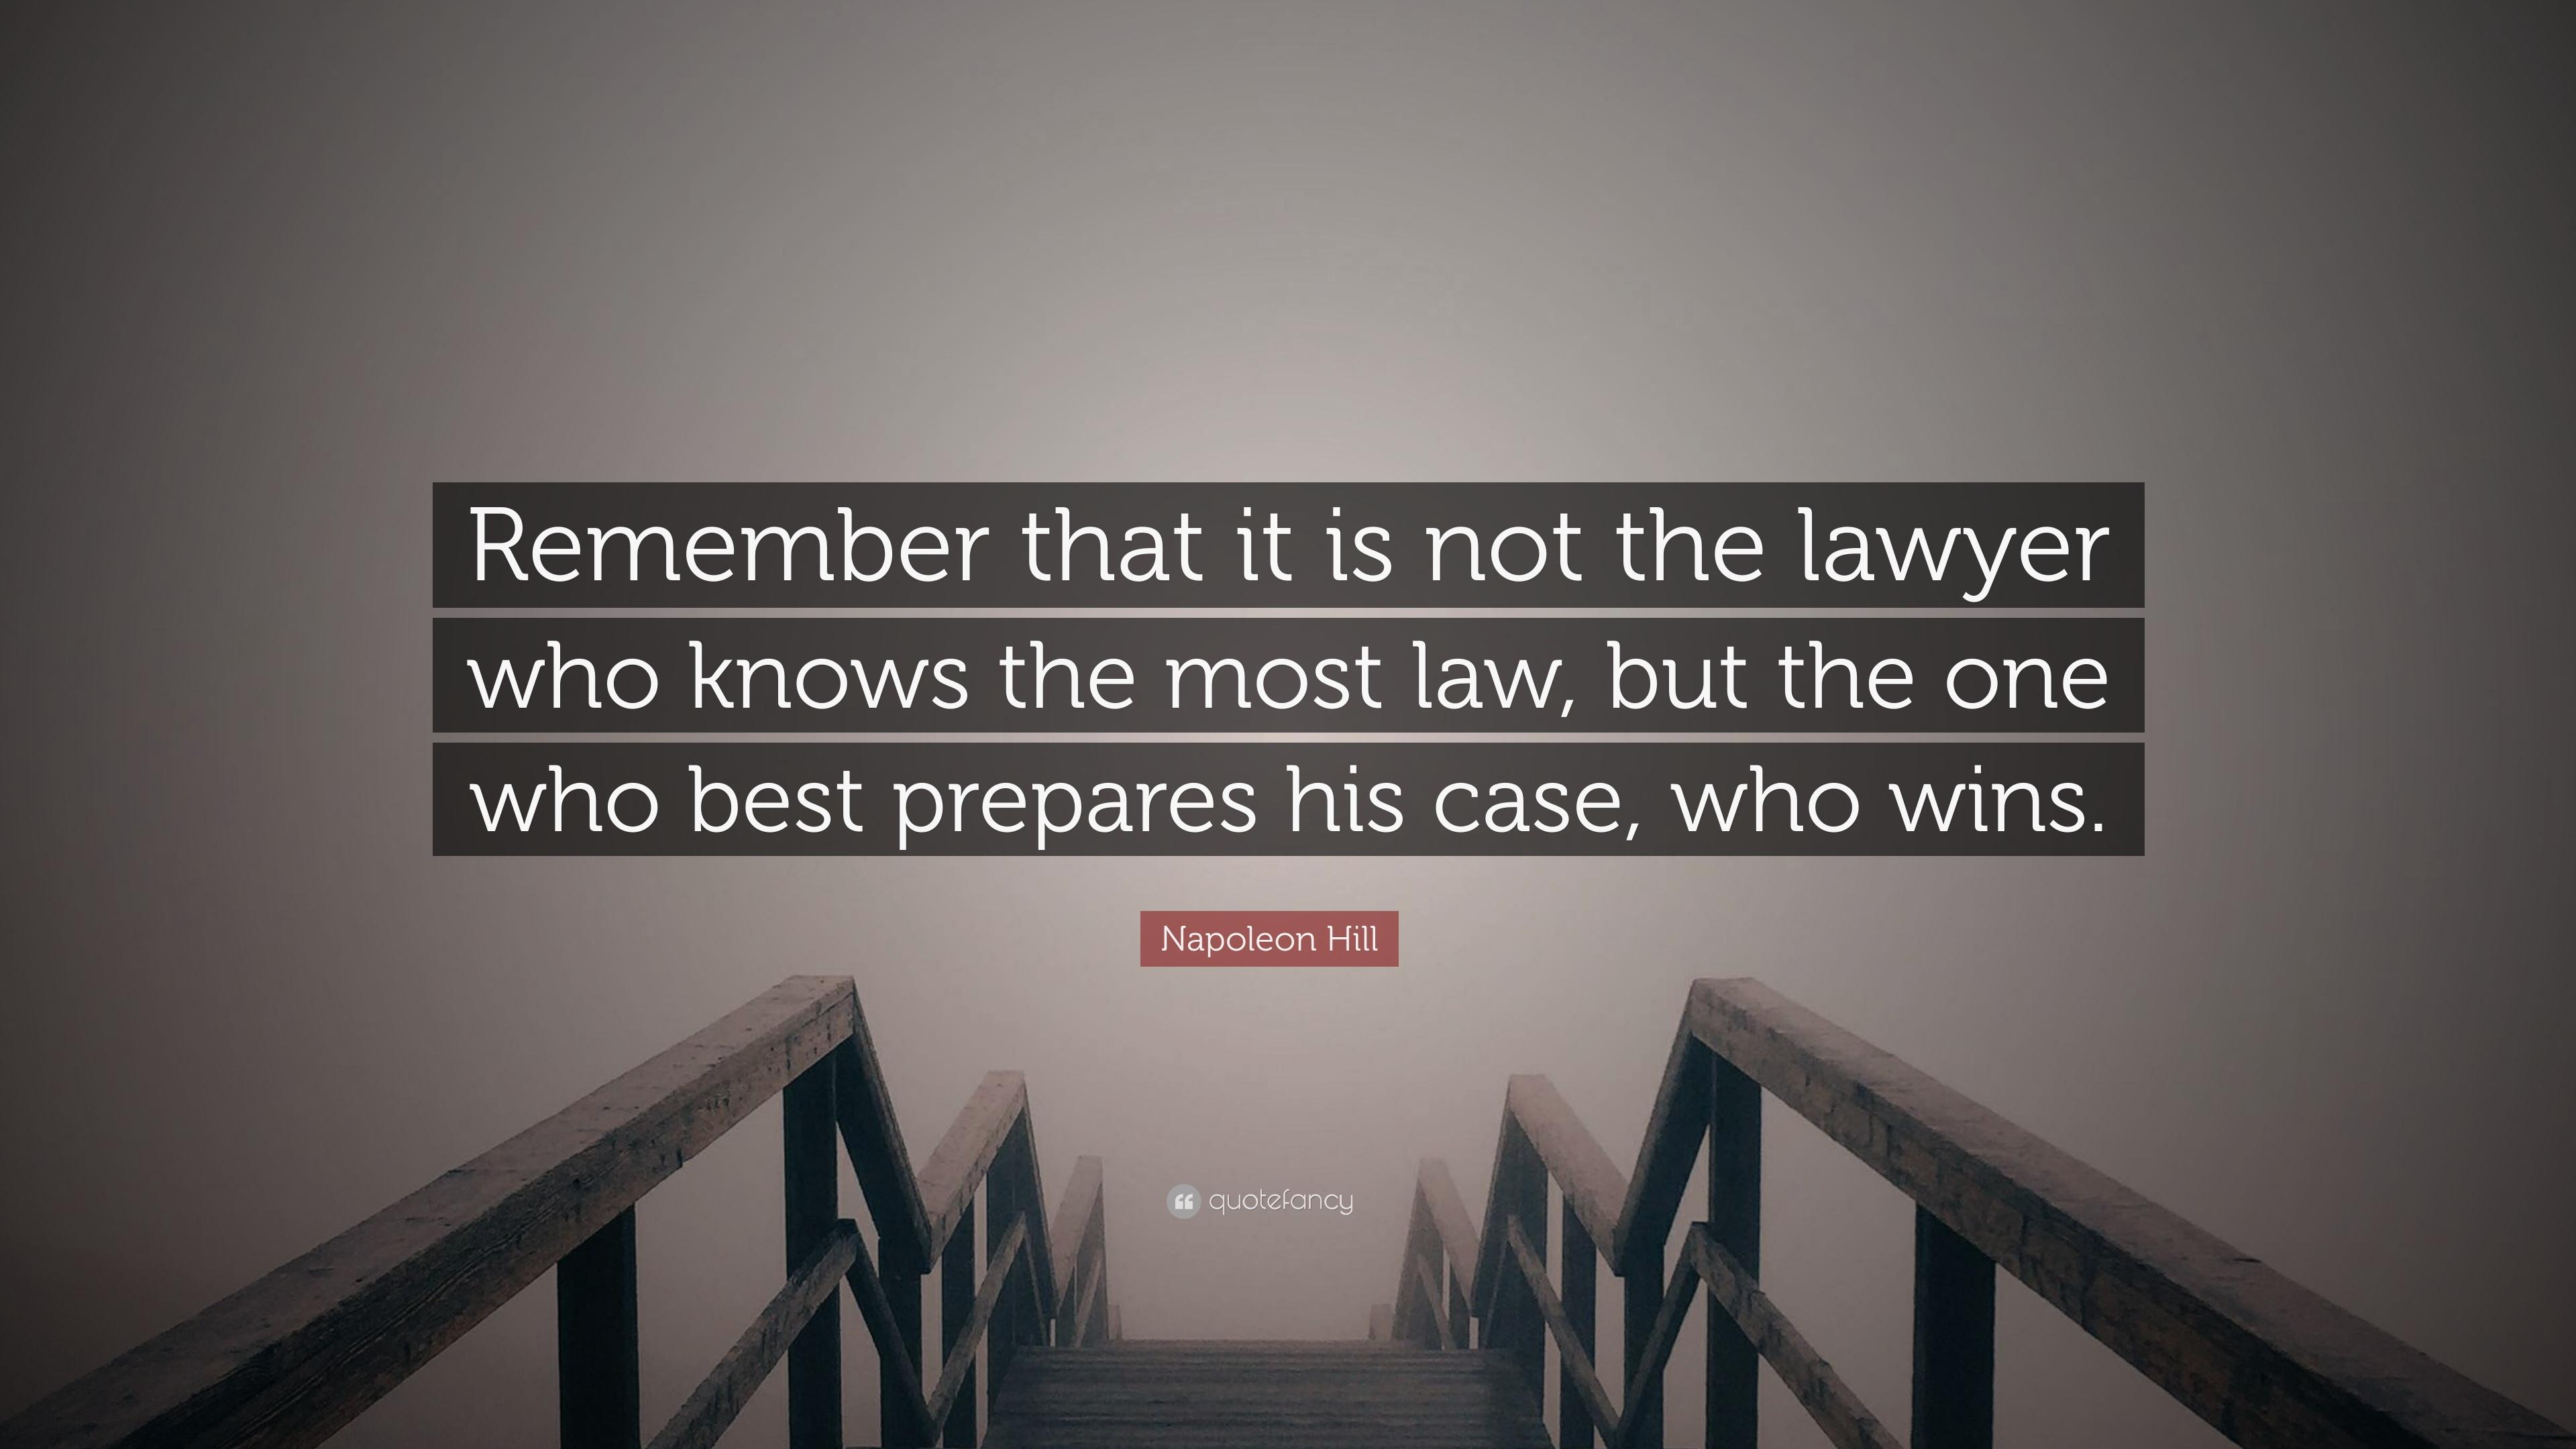 Napoleon Hill Quote: “Remember that it is not the lawyer who knows